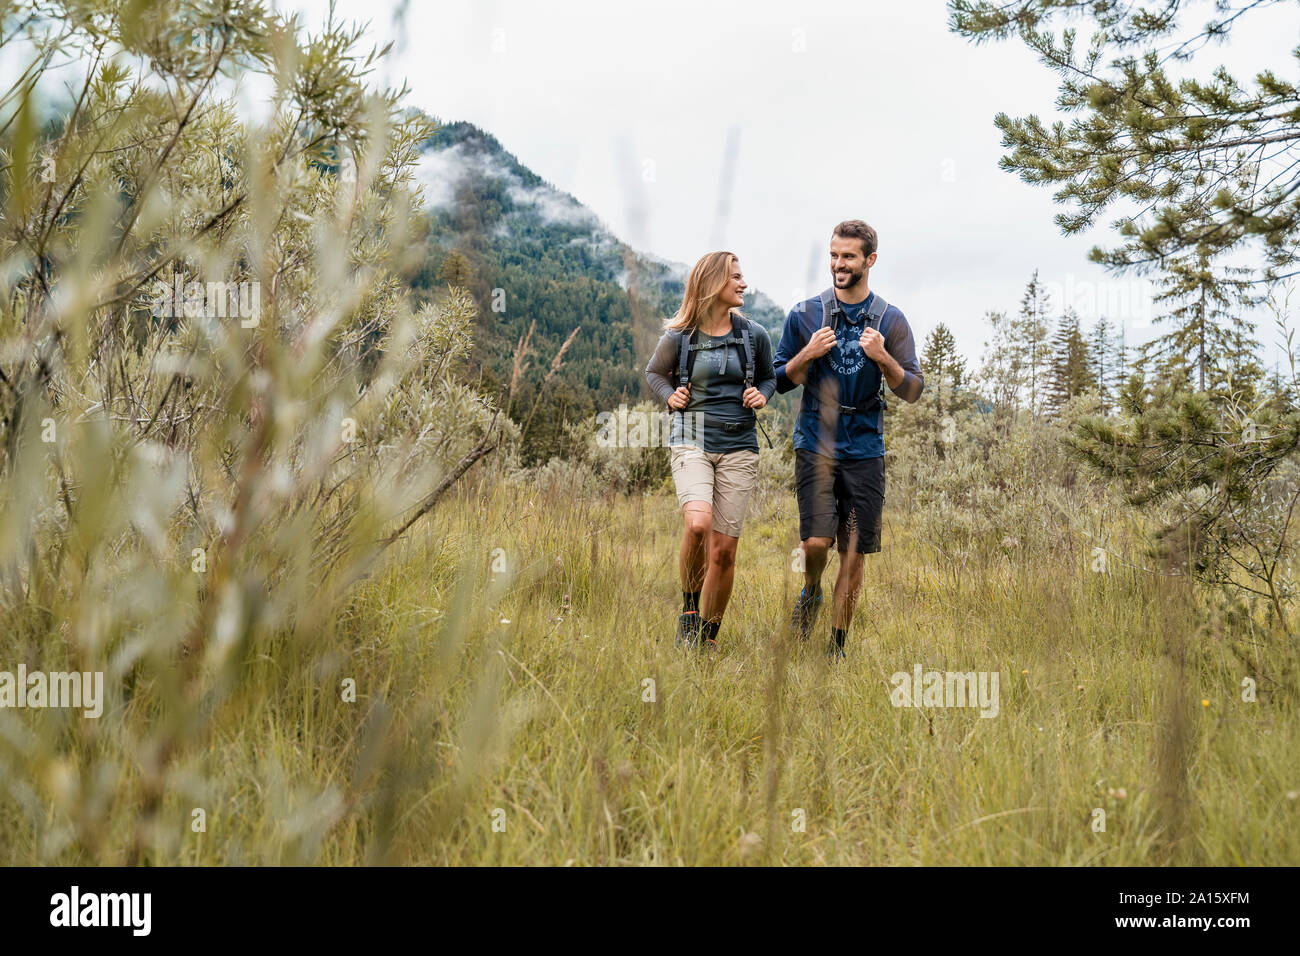 Young couple on a hiking trip, Vorderriss, Bavaria, Germany Stock Photo